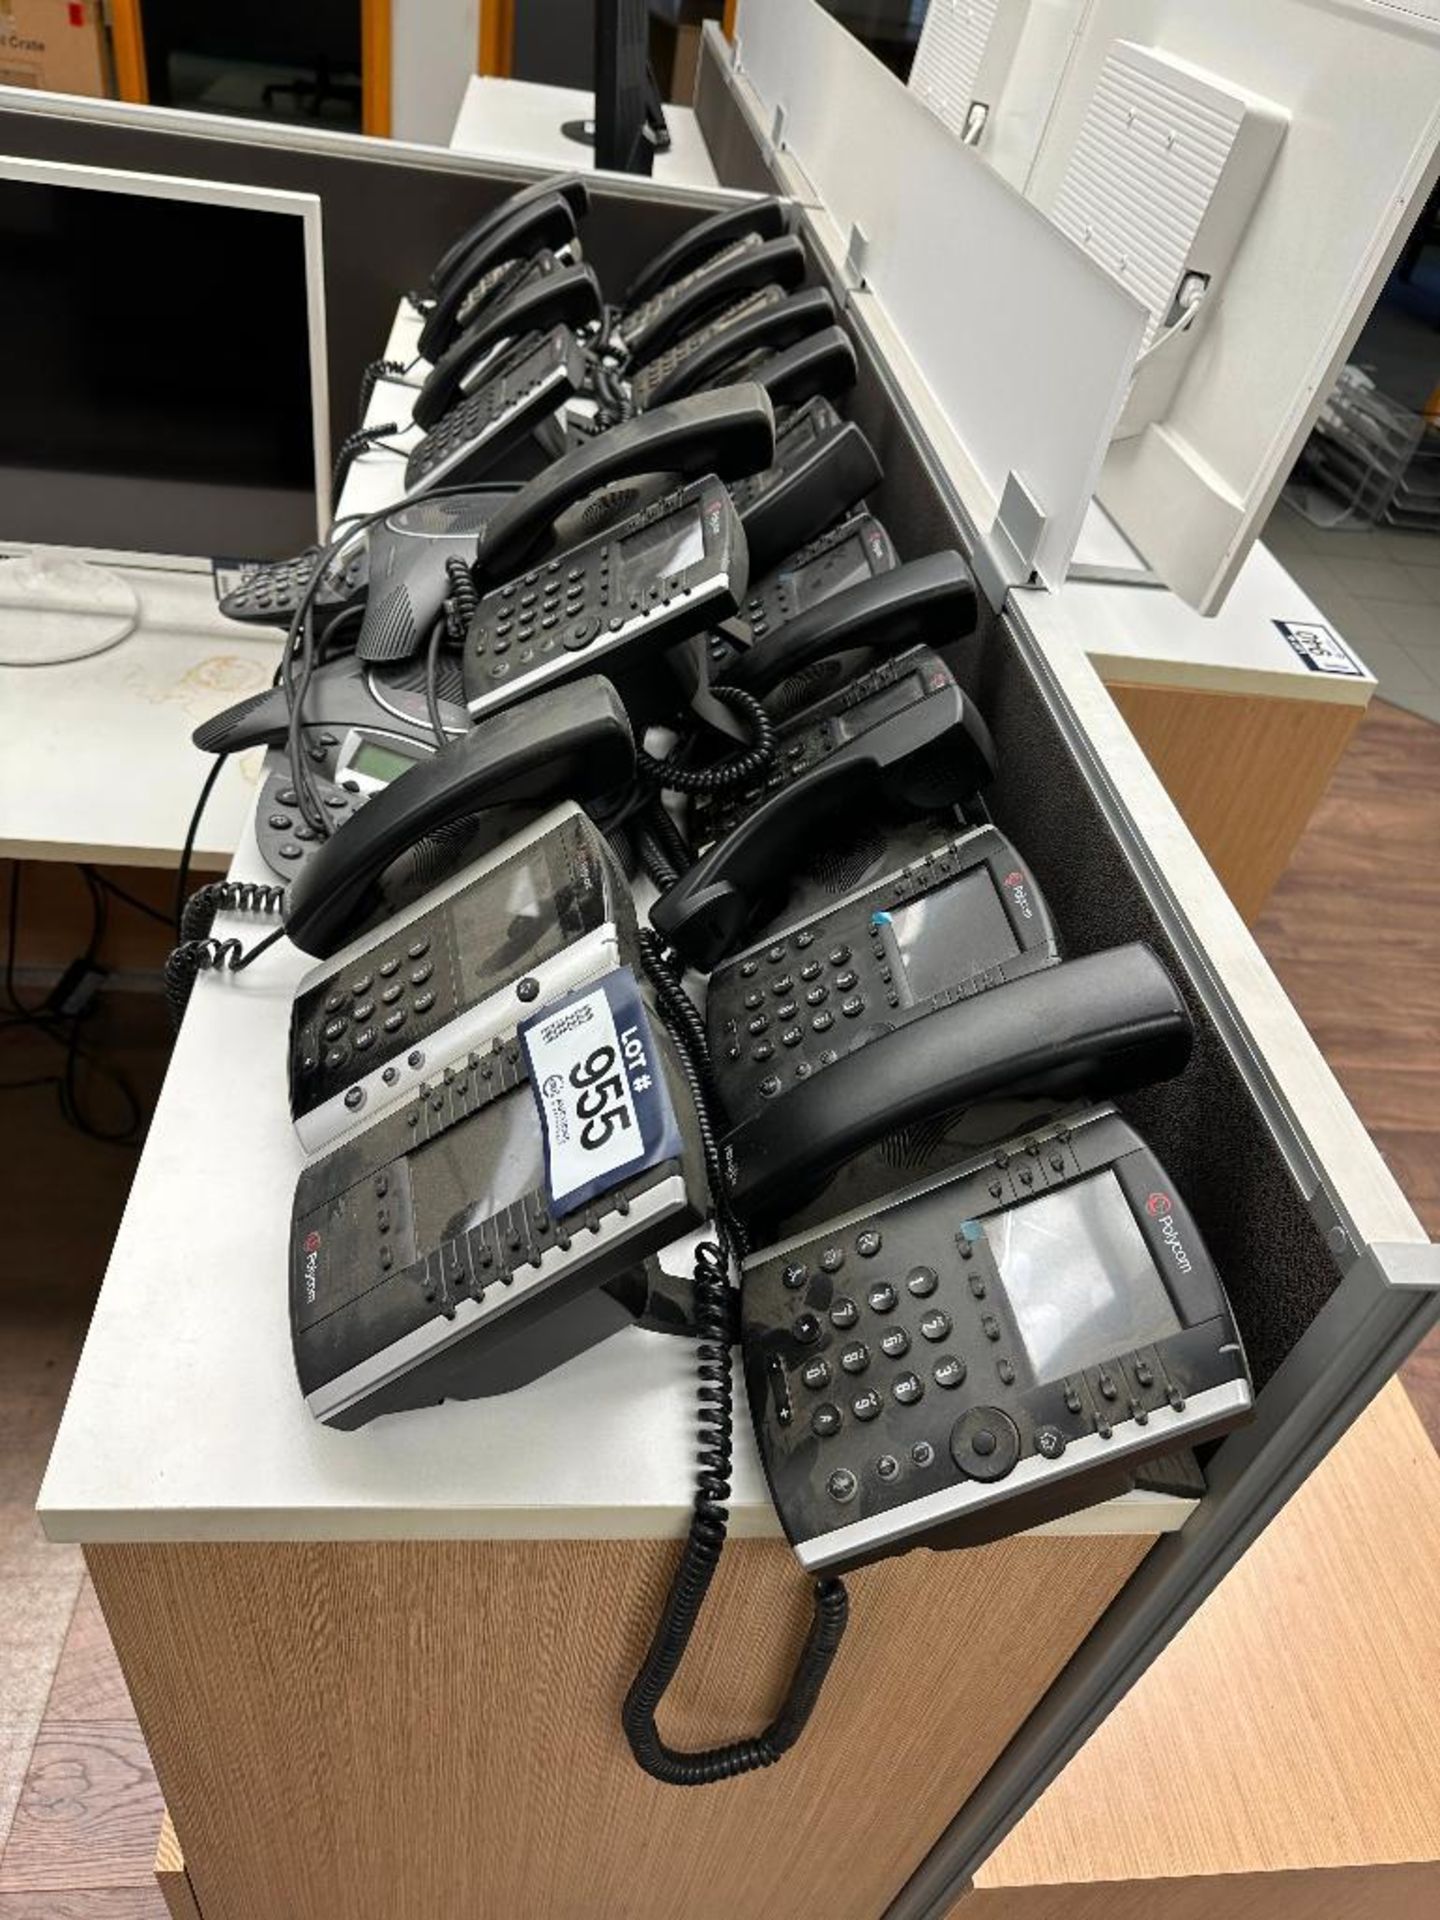 Lot of (13) Polycom Phones and (2) Polycom Conference Systems - Image 3 of 5